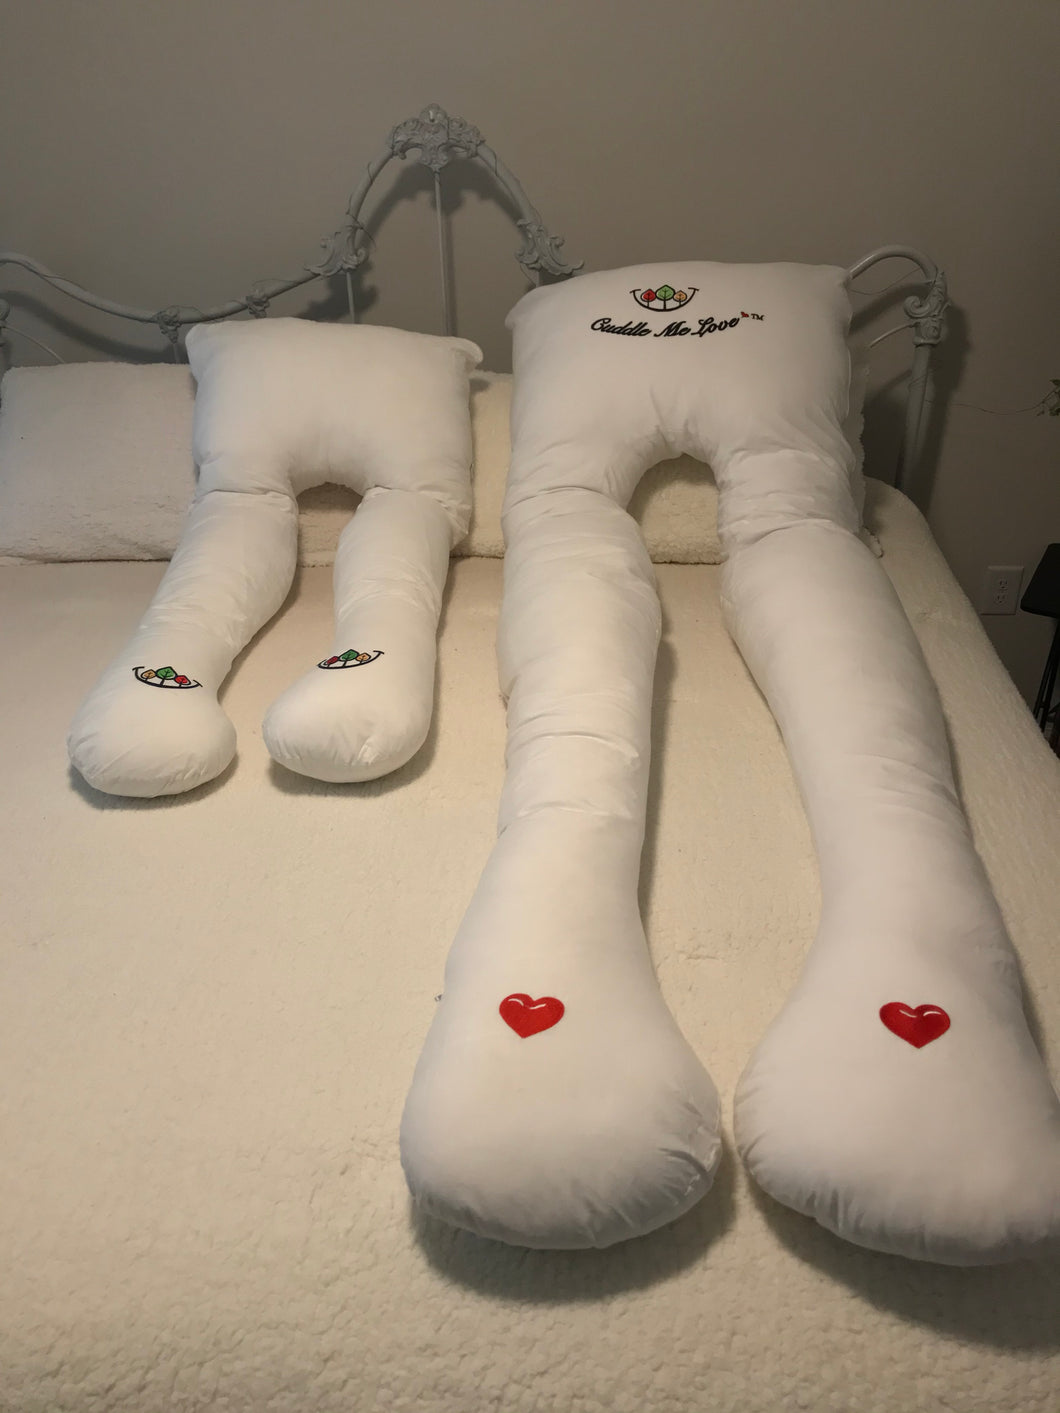 Small Cuddle Me Love Body Pillow